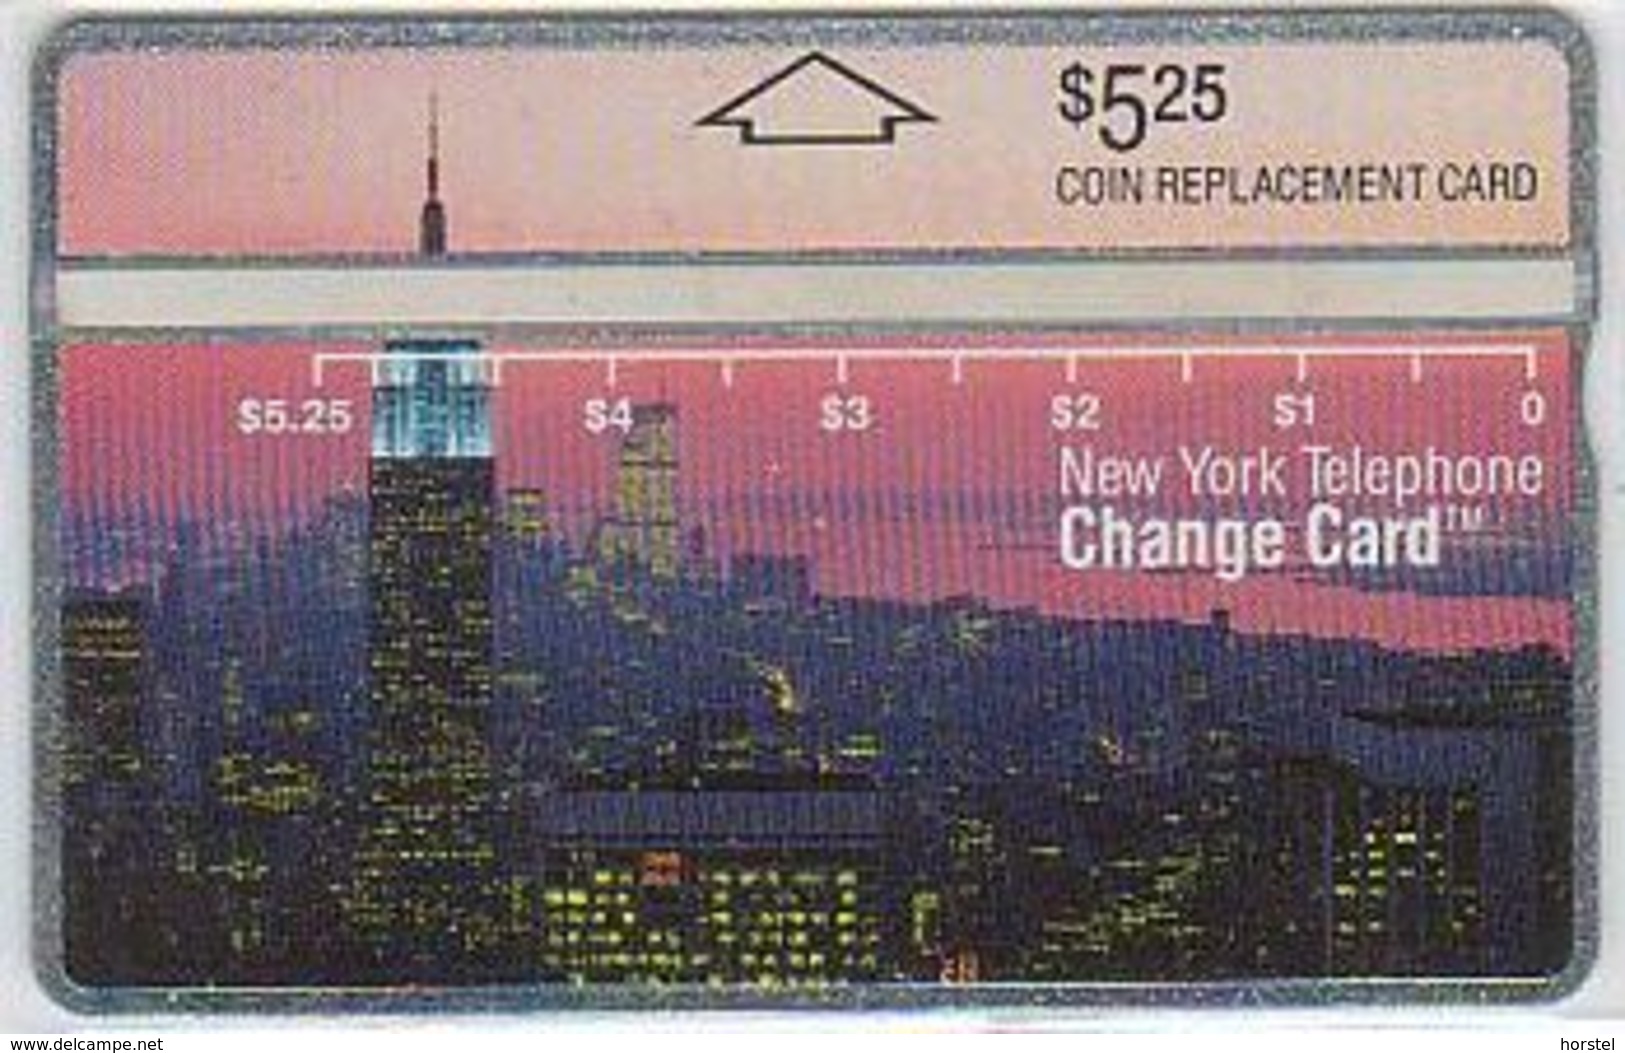 USA NYNEX NL-05 NYC By Night , White Letters, 210B, Mint - Cartes Holographiques (Landis & Gyr)